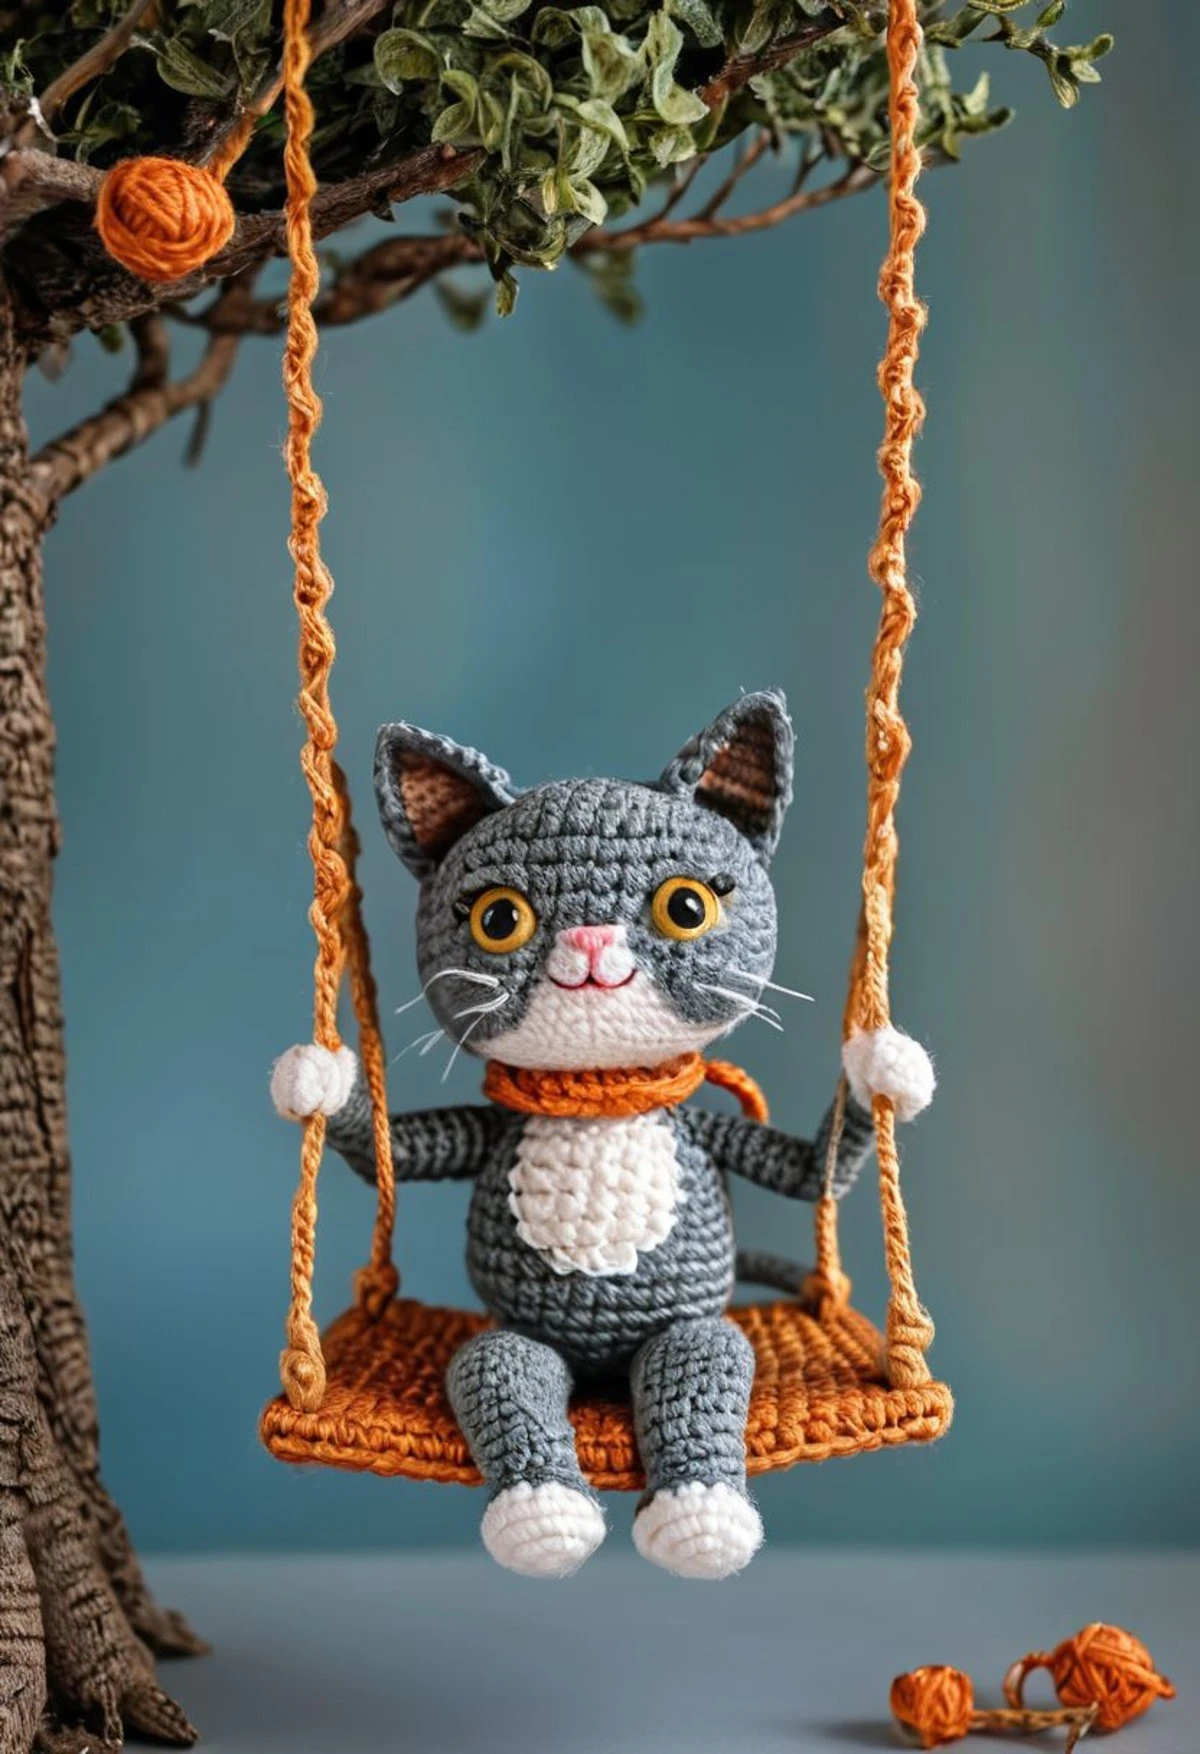 A crocheted gray and white cat sitting on an orange swing hanging from a tree branch. The cat has large, expressive eyes and a content expression.